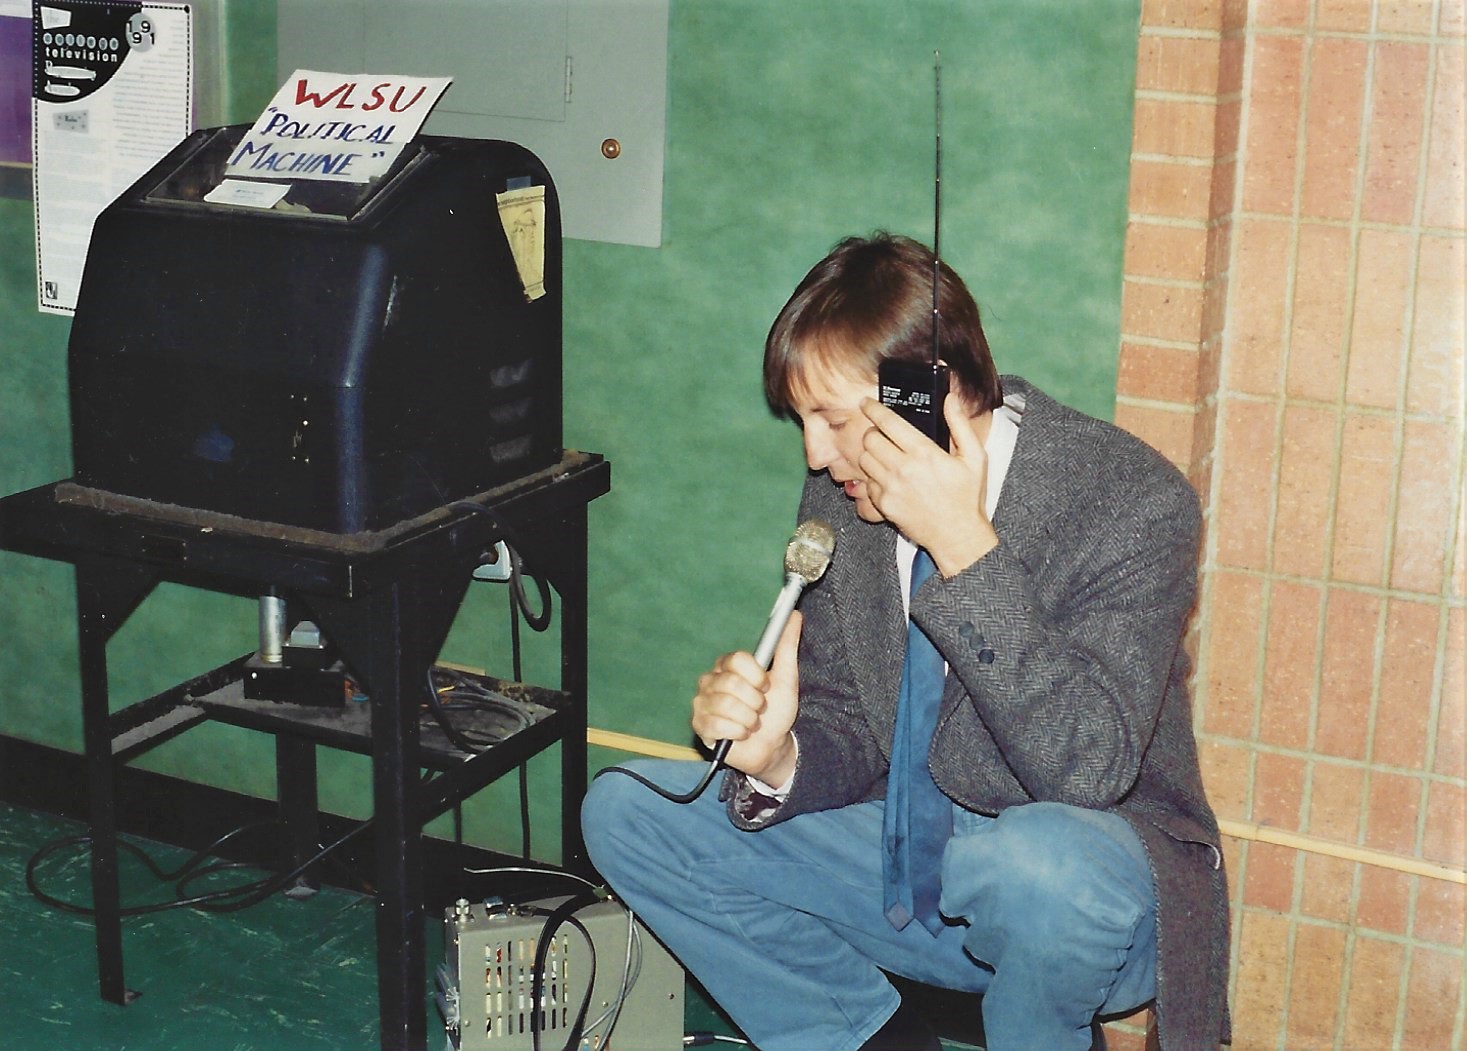 Wisconsin Public Media Director and former WPR La Crosse Regional Manager Gene Purcell during his early days as a reporter on WLSU radio. Purcell passed away on July 31 following a traffic accident; Image courtesy of WPR